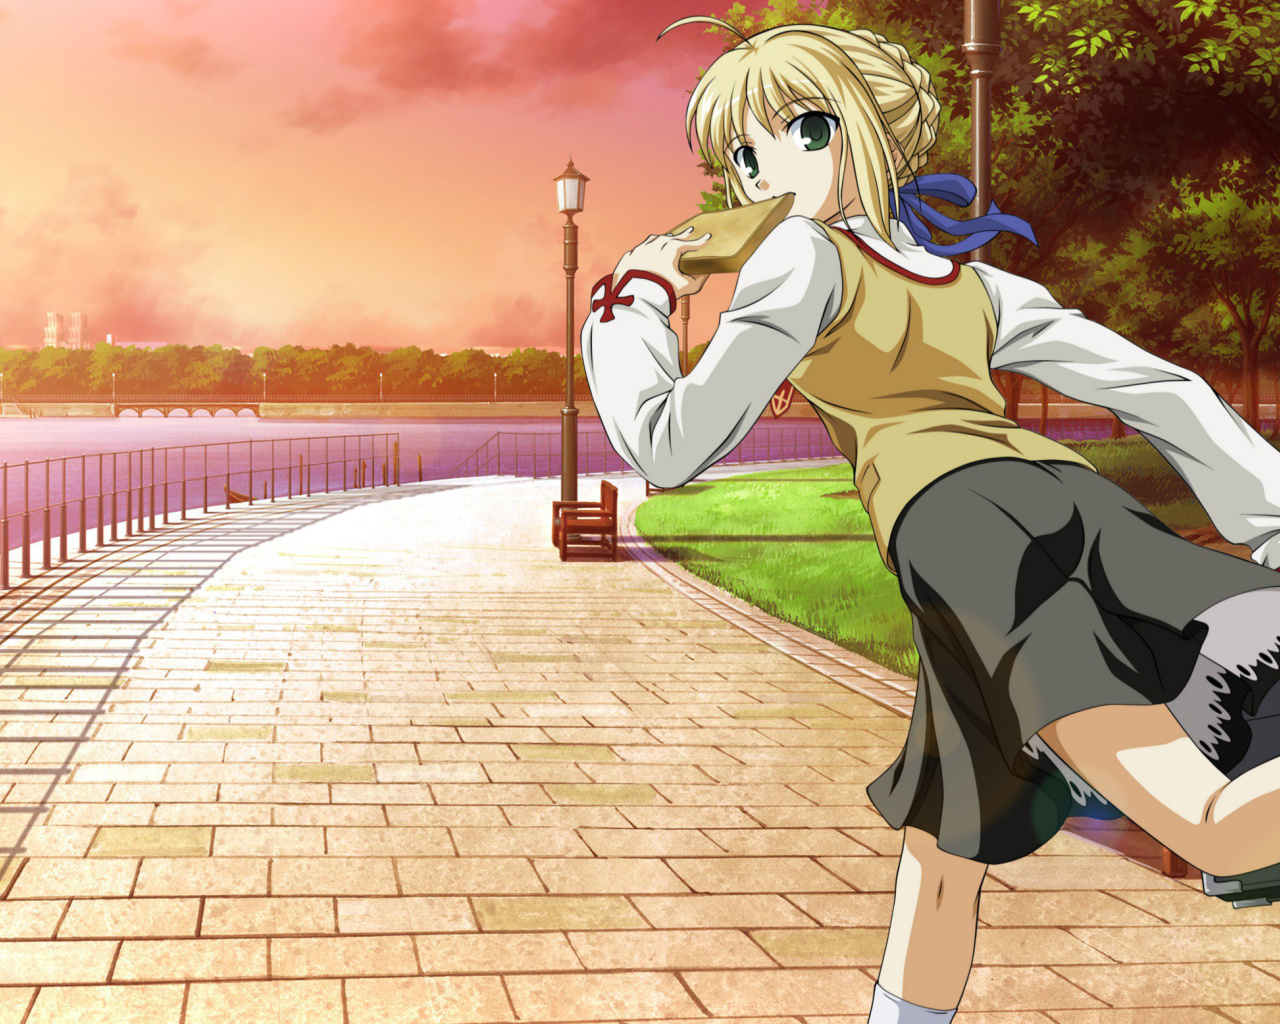 Fate stay night Saber Anime wallpaper 1280x1024